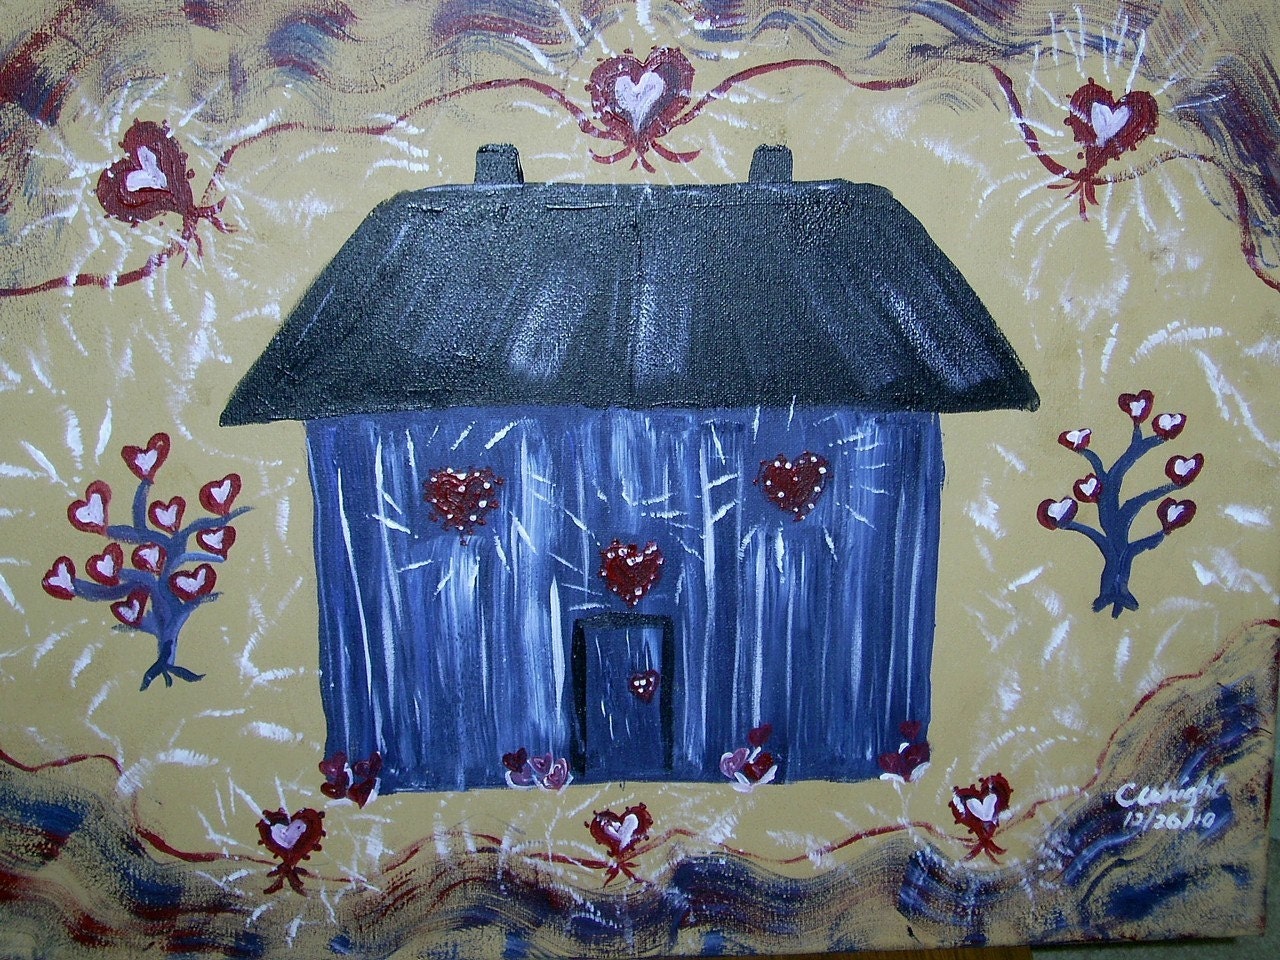 Only Hearts Build a Home 18x24 inch acrylic painting on stretched canvas FREE USA SHIPPING